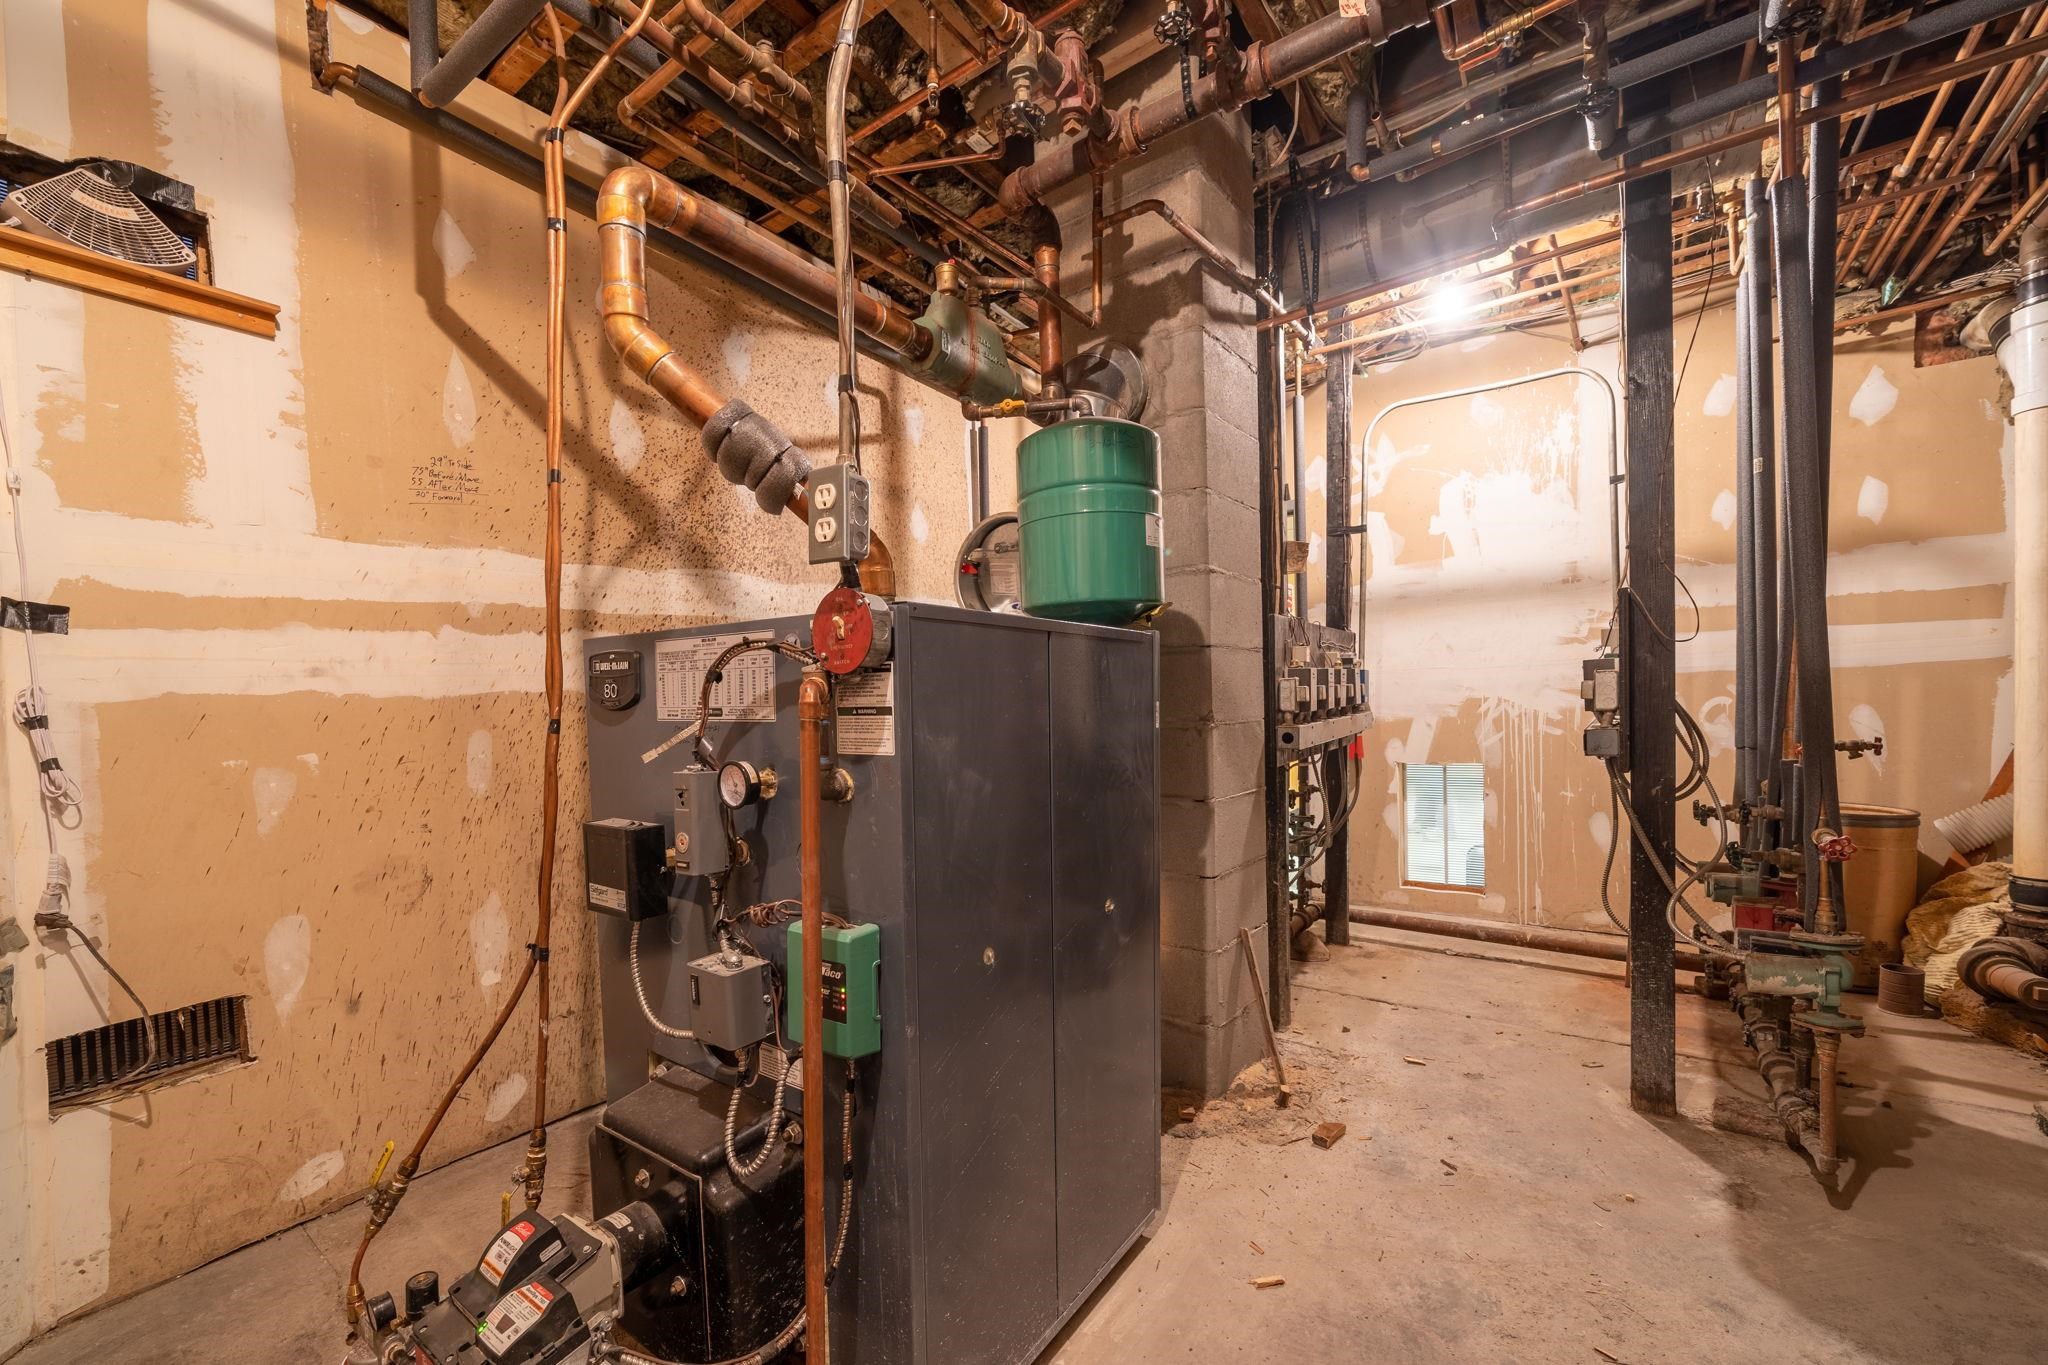 An upgrade to the heating system, including a new boiler and a new masonry chimney, was completed in the fall of 2021! Metering is set up to allow for a future owner to have tenants pay for their own heat.